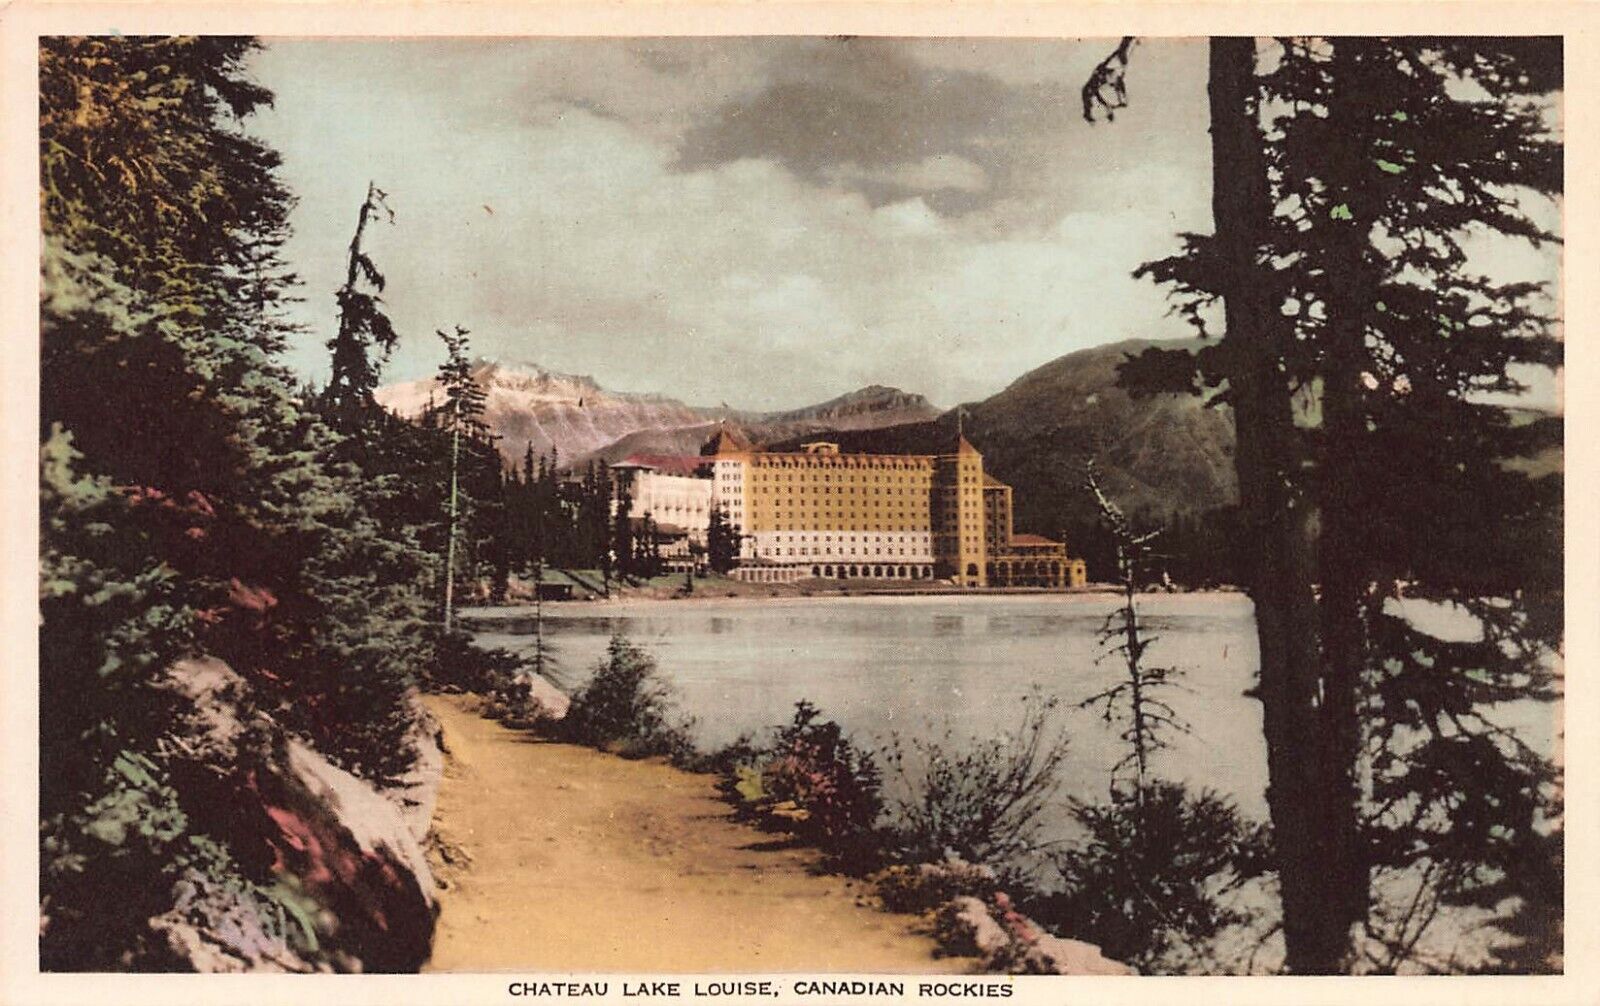 Chateau Lake Louise, Canadian Rockies, Canada, Early Hand Colored Postcard